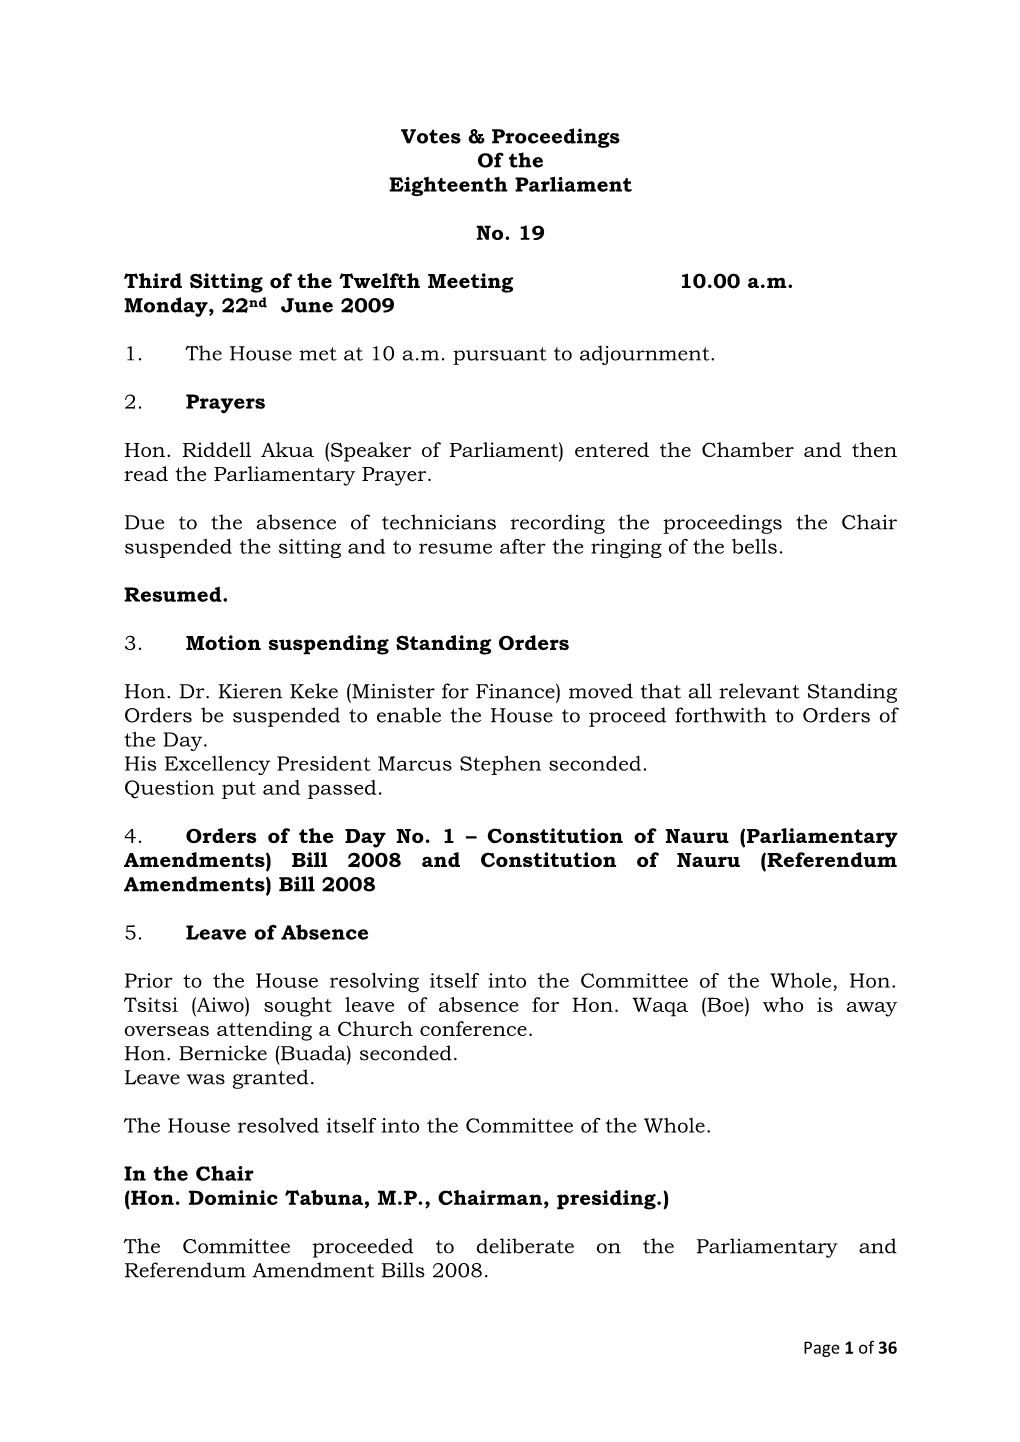 Votes & Proceedings of the Eighteenth Parliament No. 19 Third